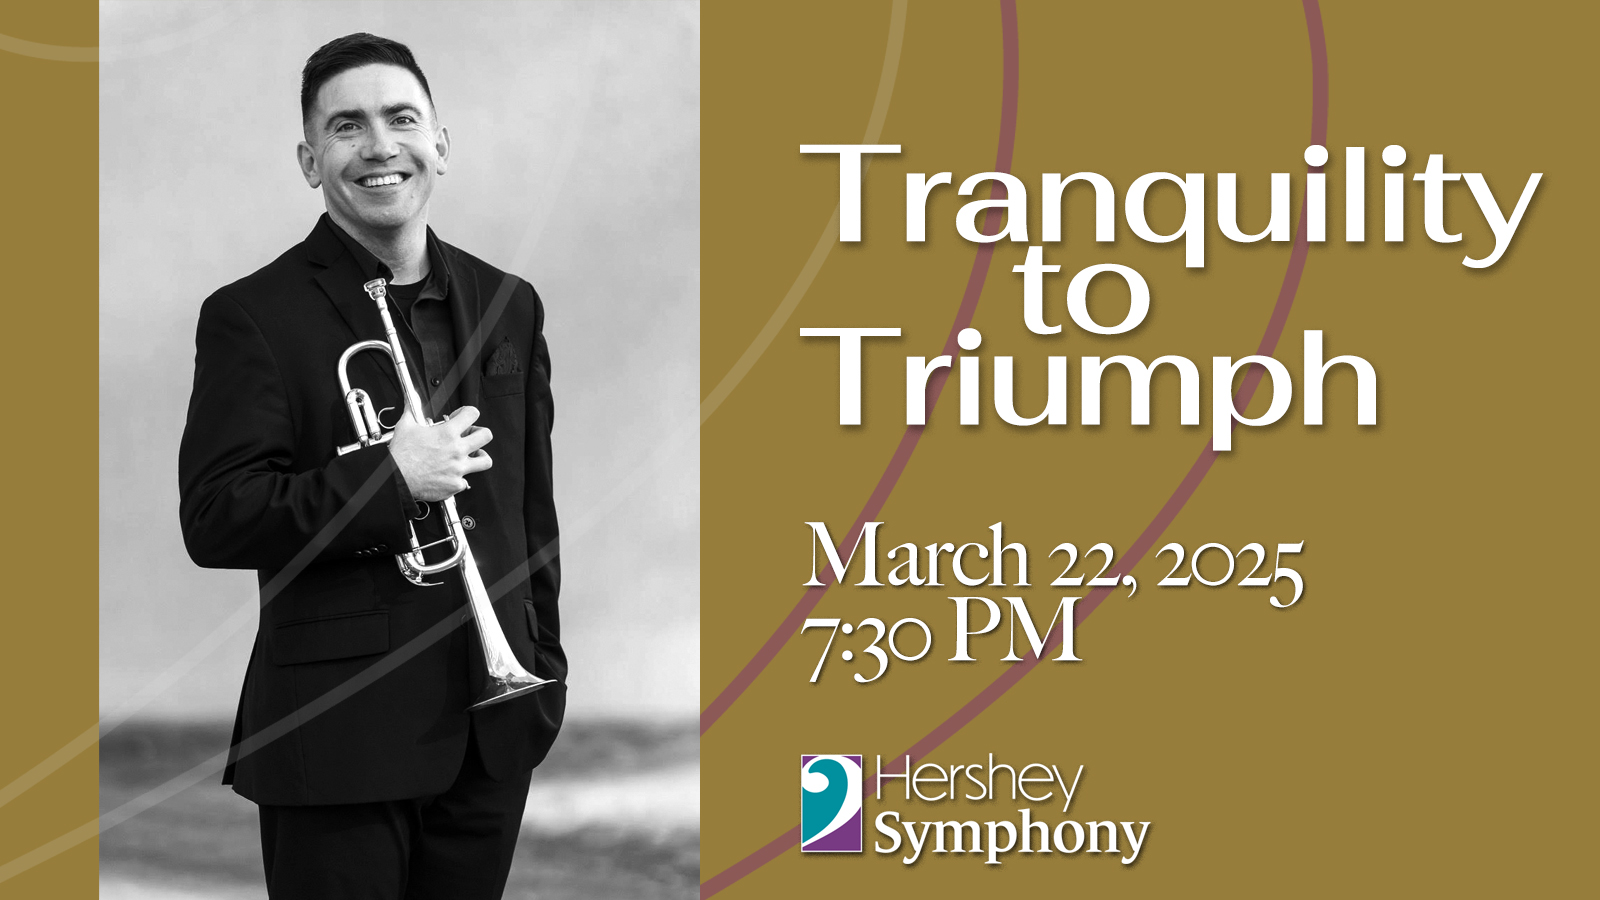 Tranquility to Triumph March 22 at 7:30 PM